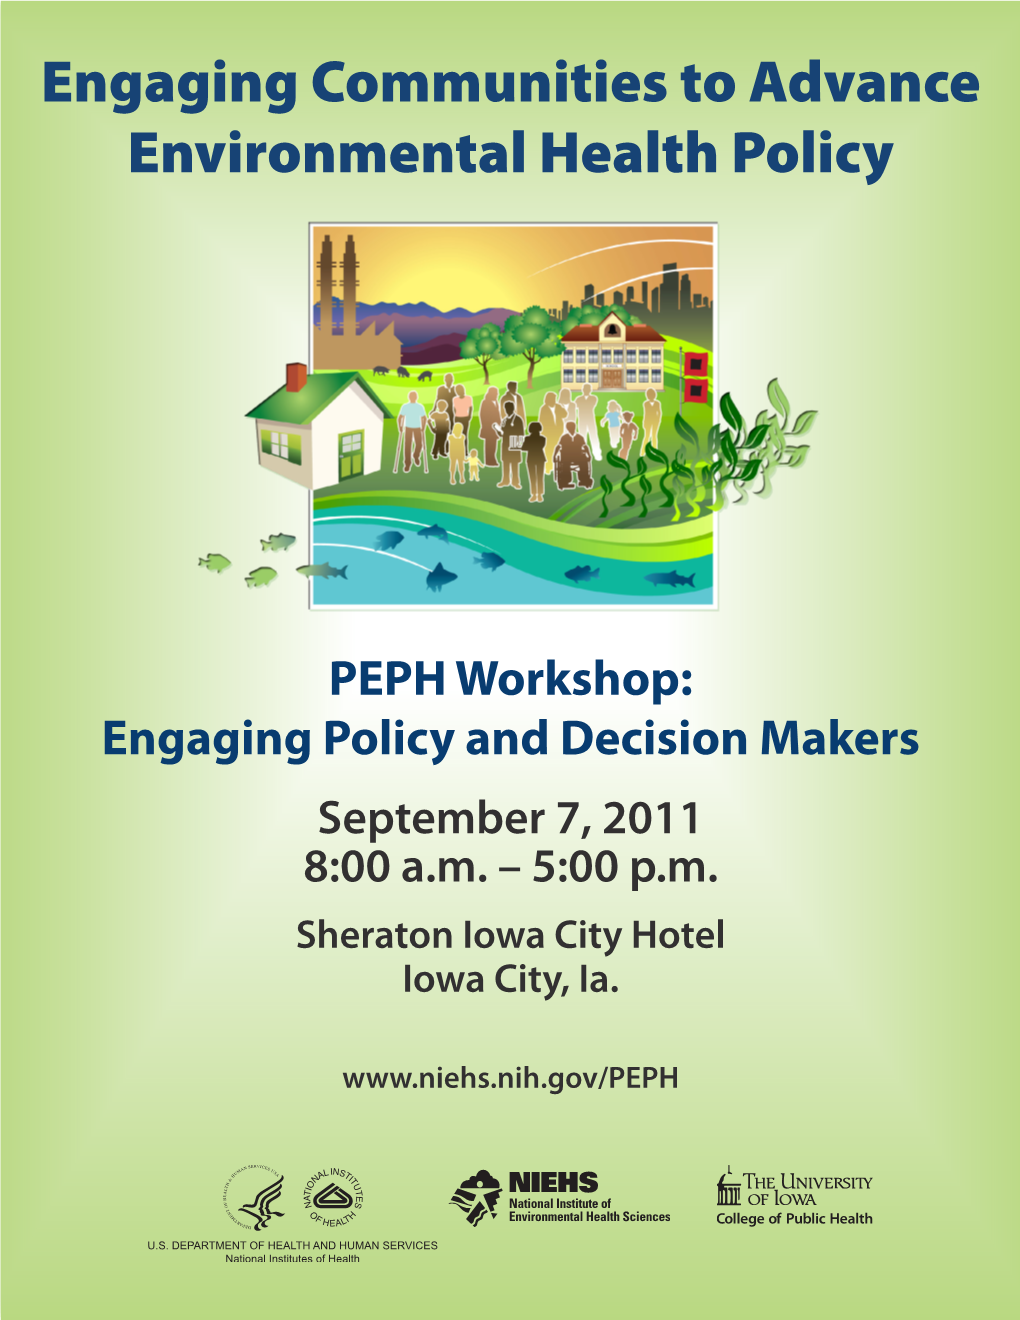 PEPH Workshop: Engaging Policy and Decision Makers September 7, 2011 8:00 A.M